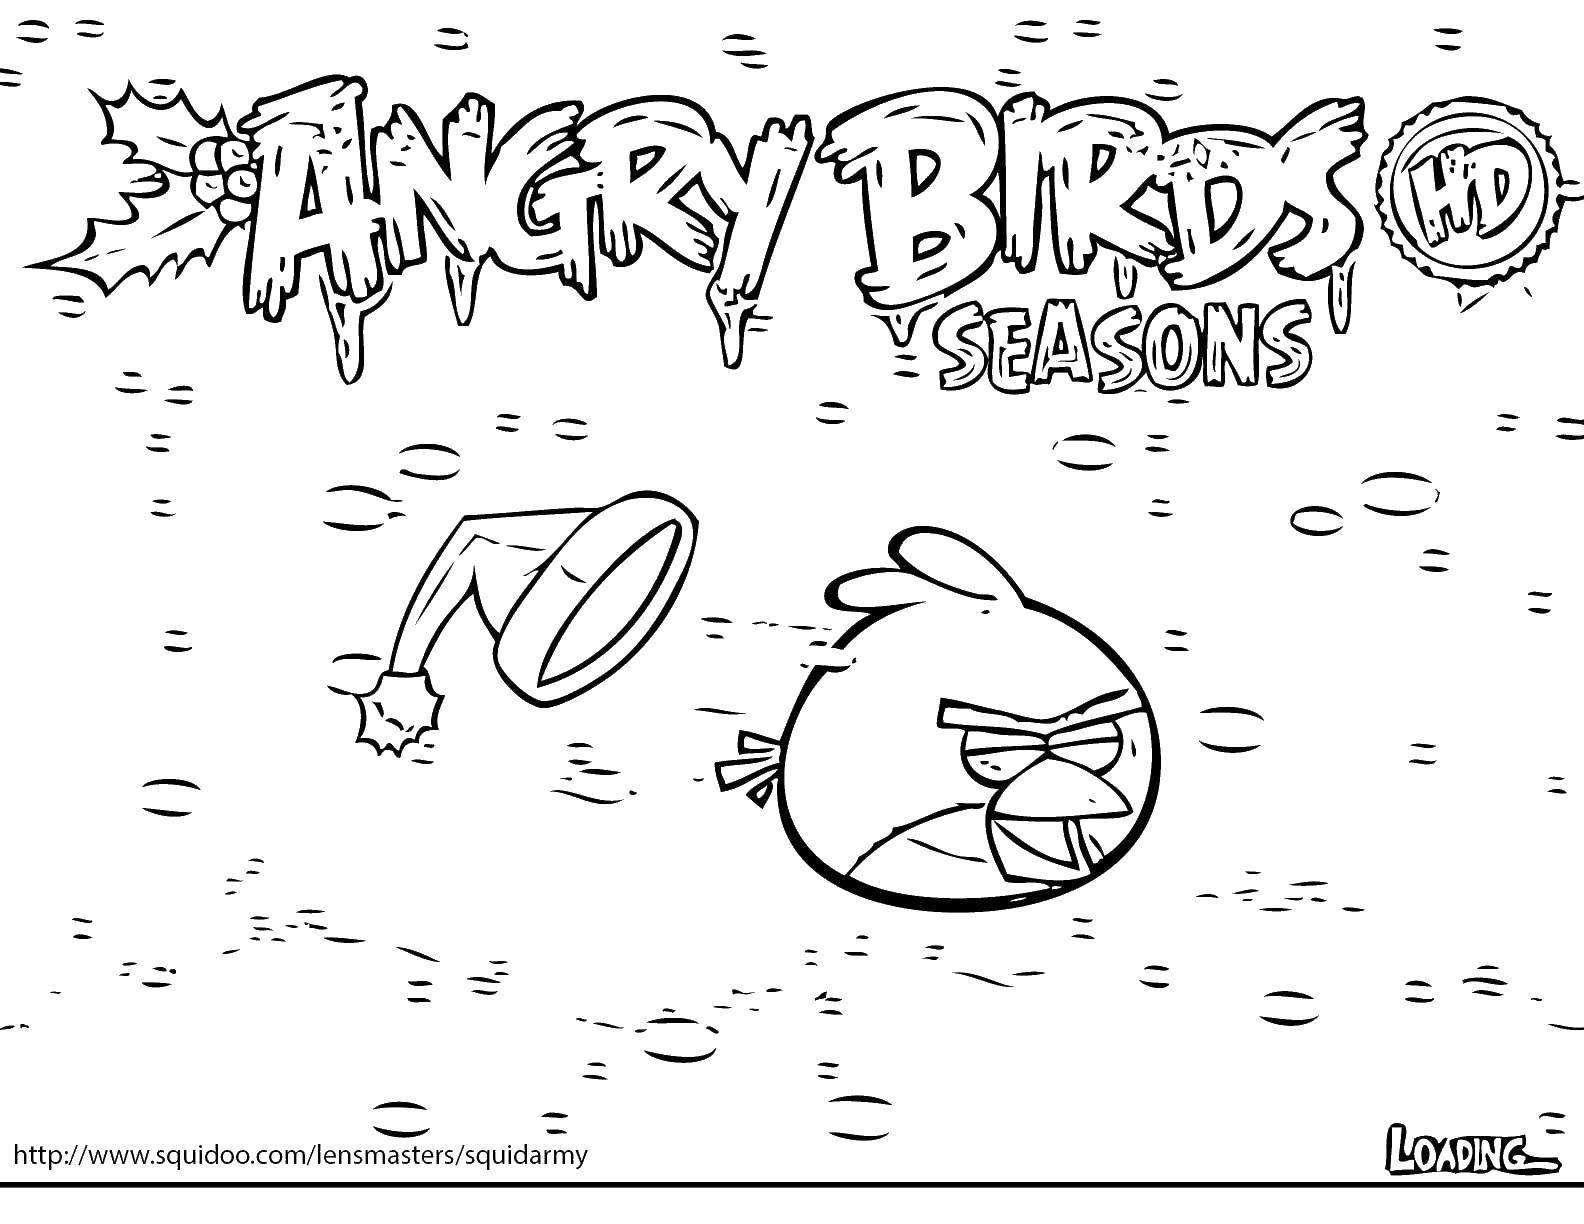 Coloring Angry birds. Category angry birds. Tags:  birds, birds, games, angry birds.